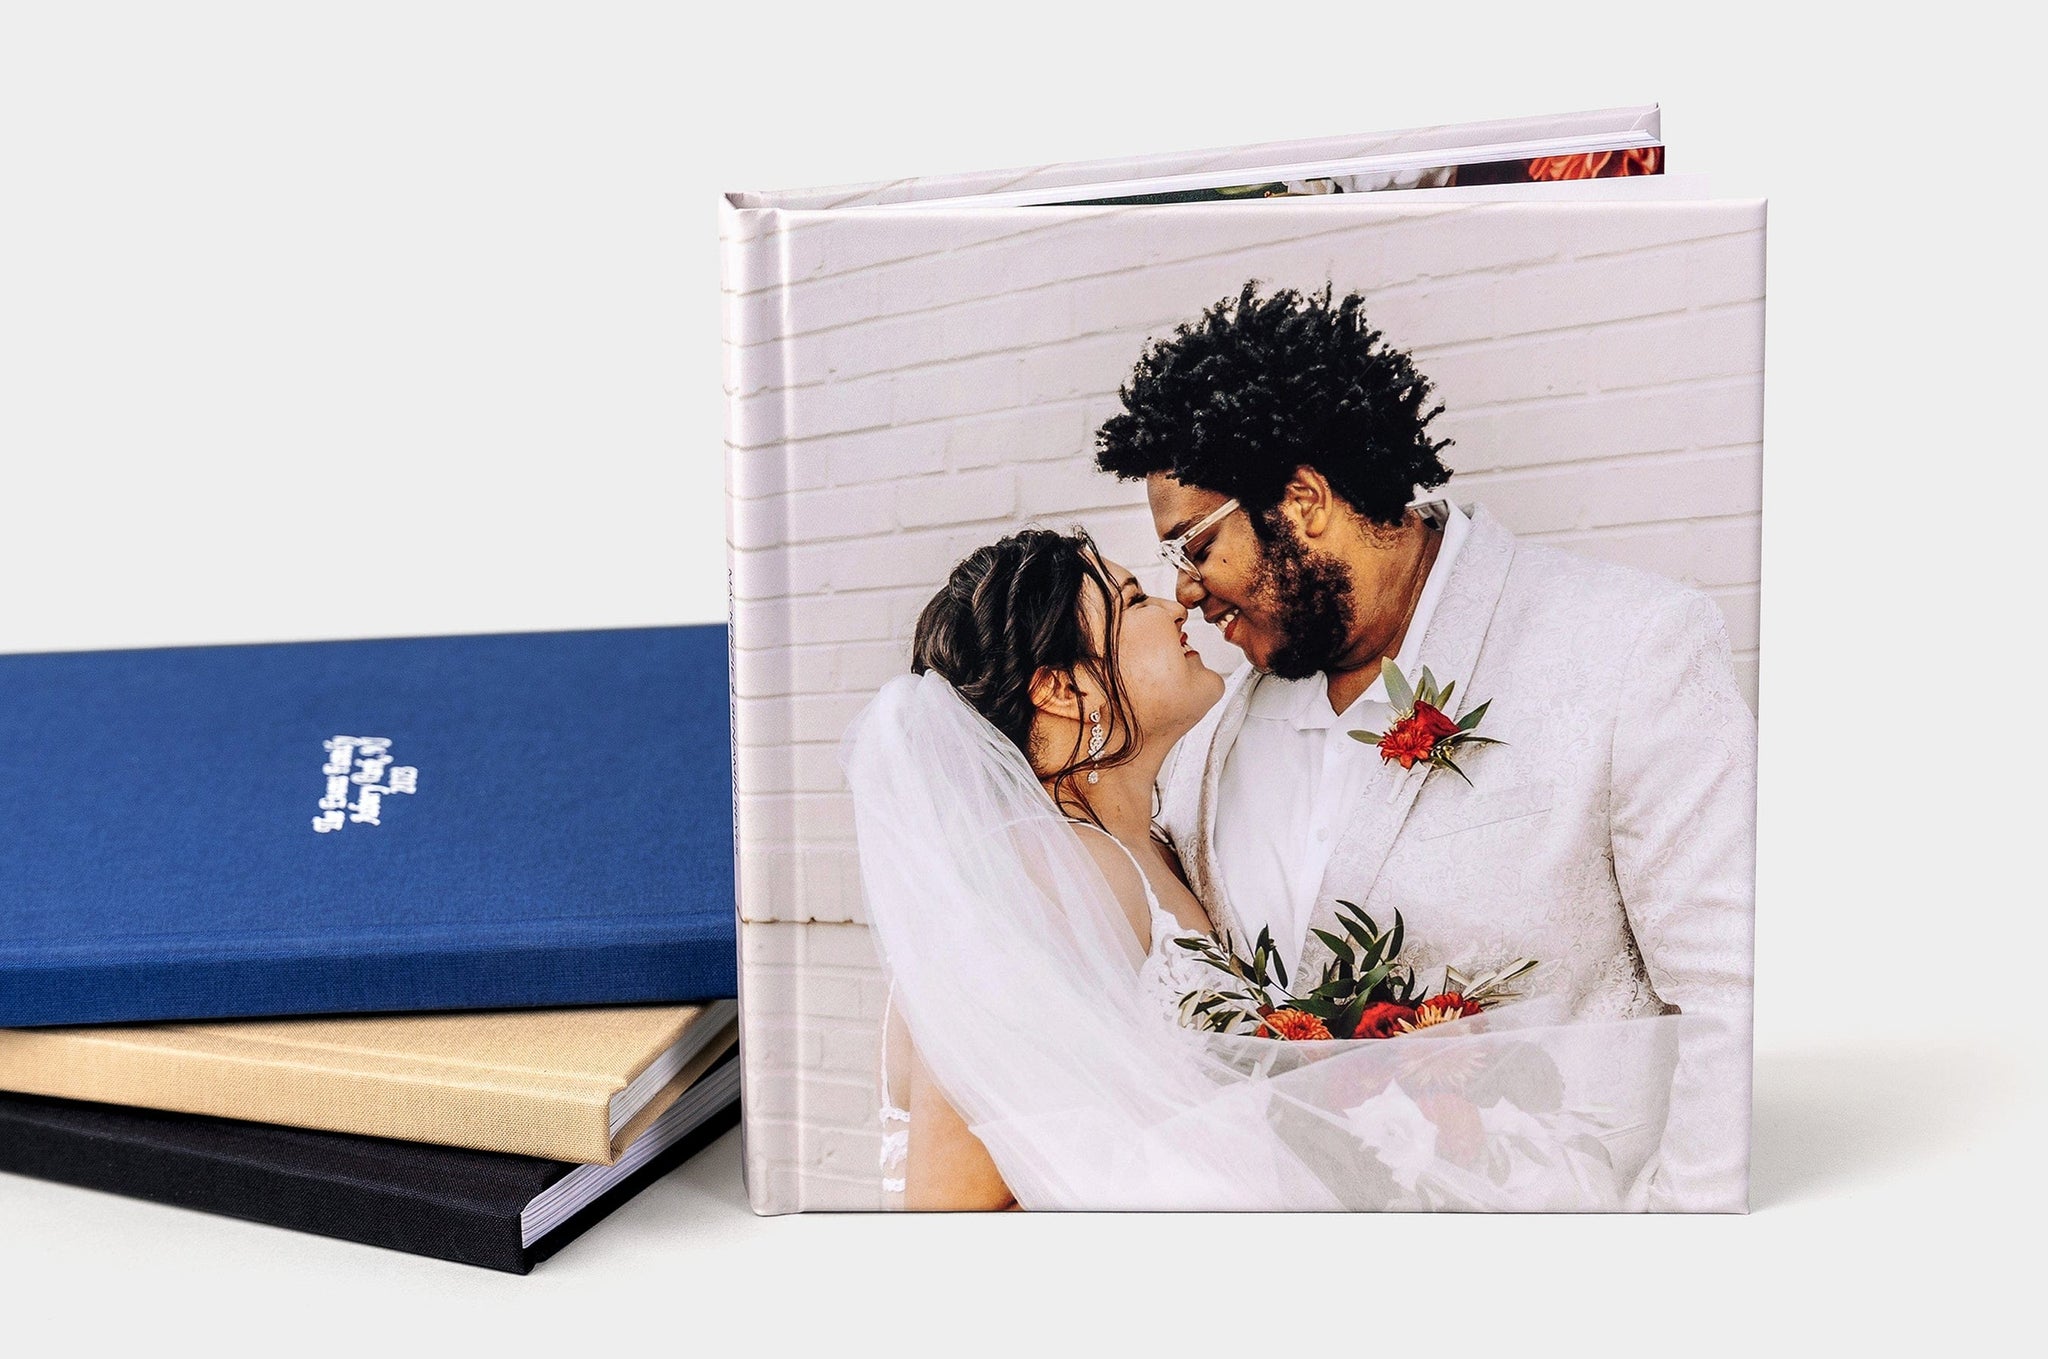 Four Photo Books arranged in a fetching manner, the main focus is a book with a Lustre Photo Cover featuring a happy bride and groom.